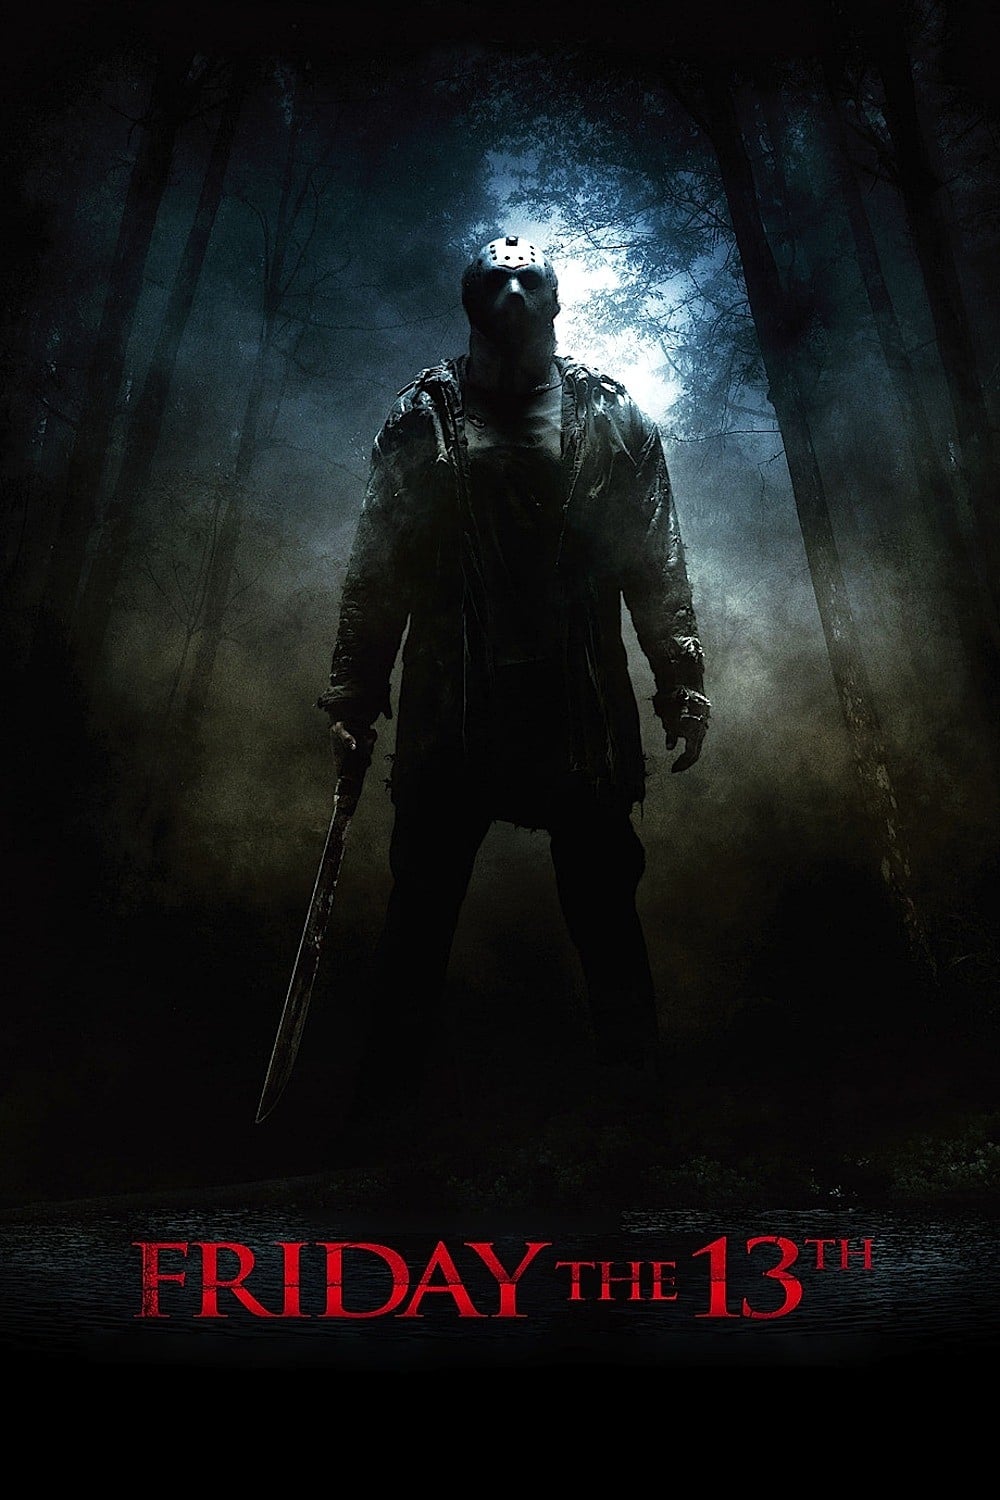 Friday The 13th (2009) Movie Poster Framed or Unframed Glossy Poster Free UK Shipping!!!